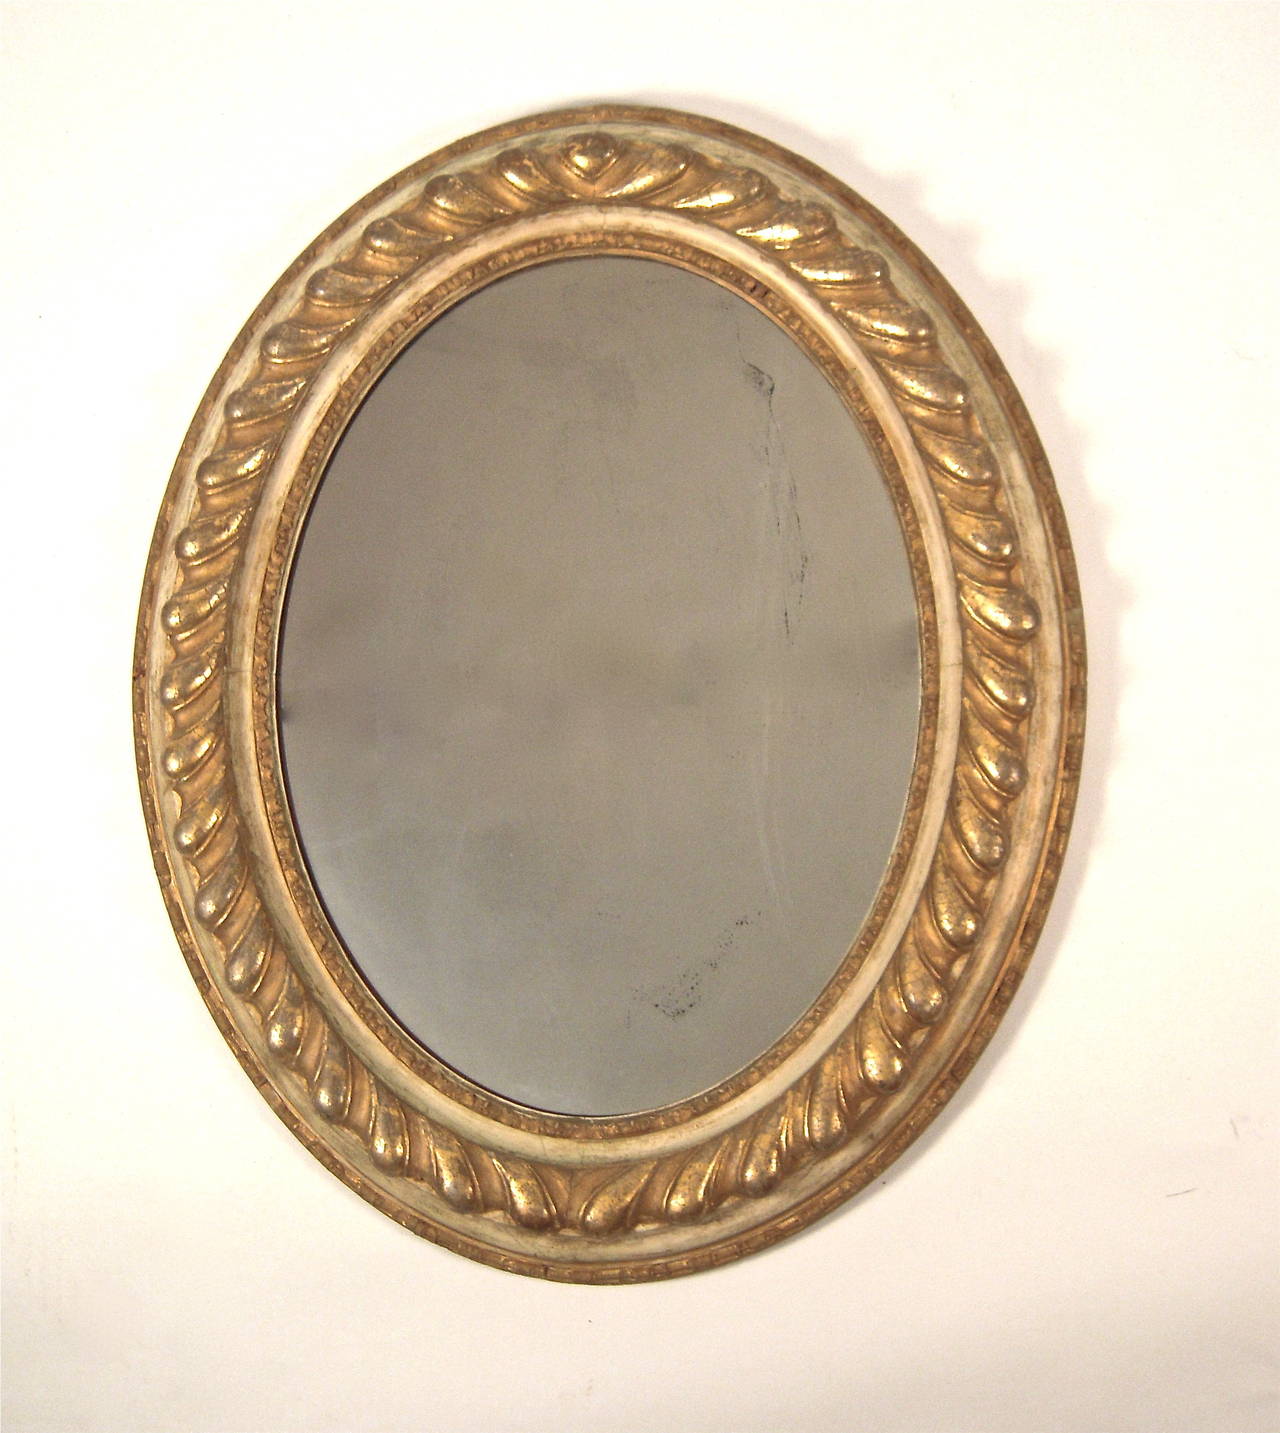 A 19th century neoclassical Italian oval giltwood mirror with gilded gadrooned border in high relief surrounded by bands of cream colored paint and gilded borders, with original mirror glass.